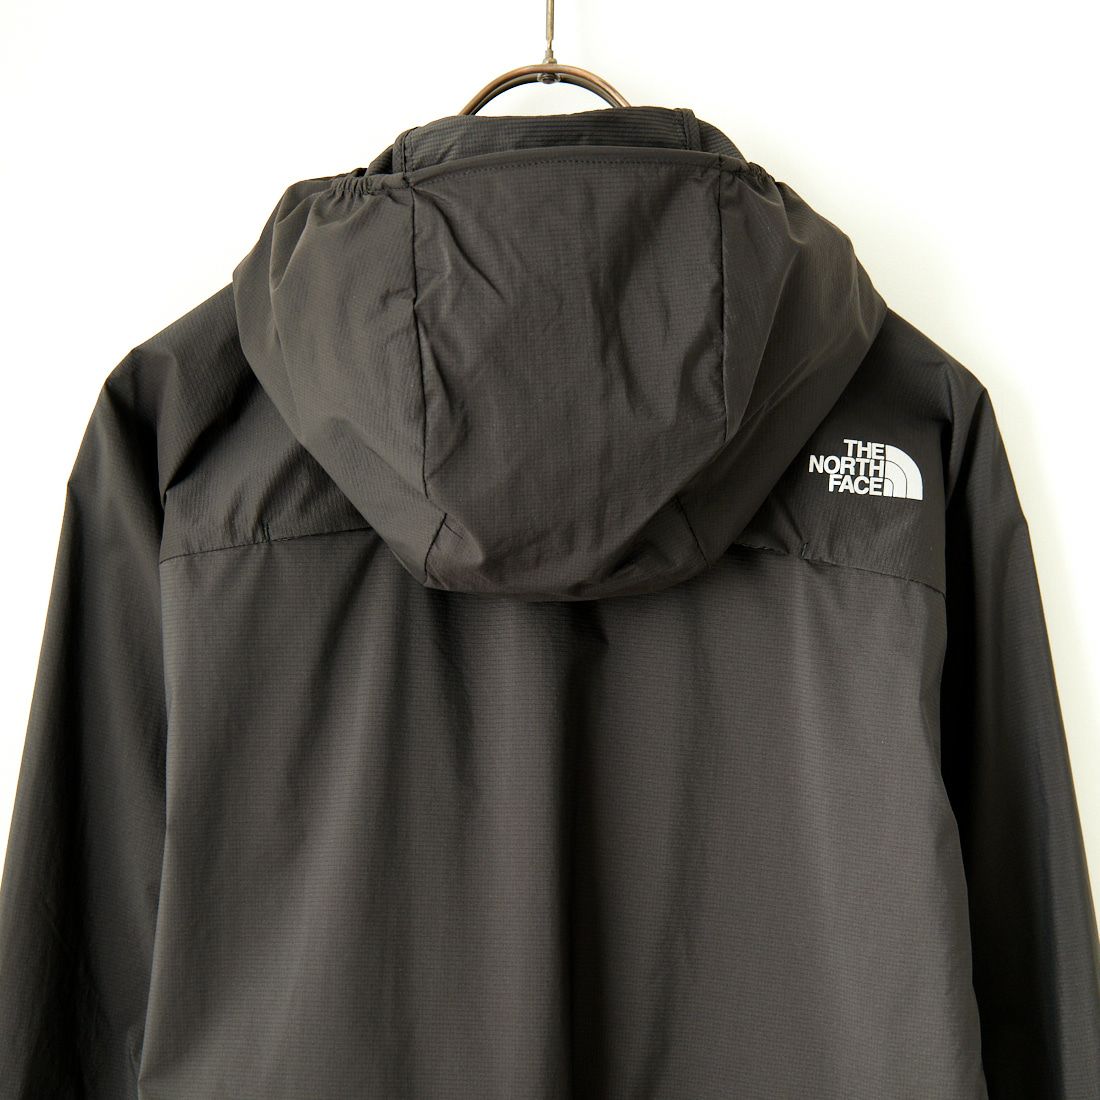 THE NORTH FACE [ザ ノースフェイス] スワローテイル ベントフーディ [NP22280]｜ジーンズファクトリー公式通販サイト -  JEANS FACTORY Online Shop